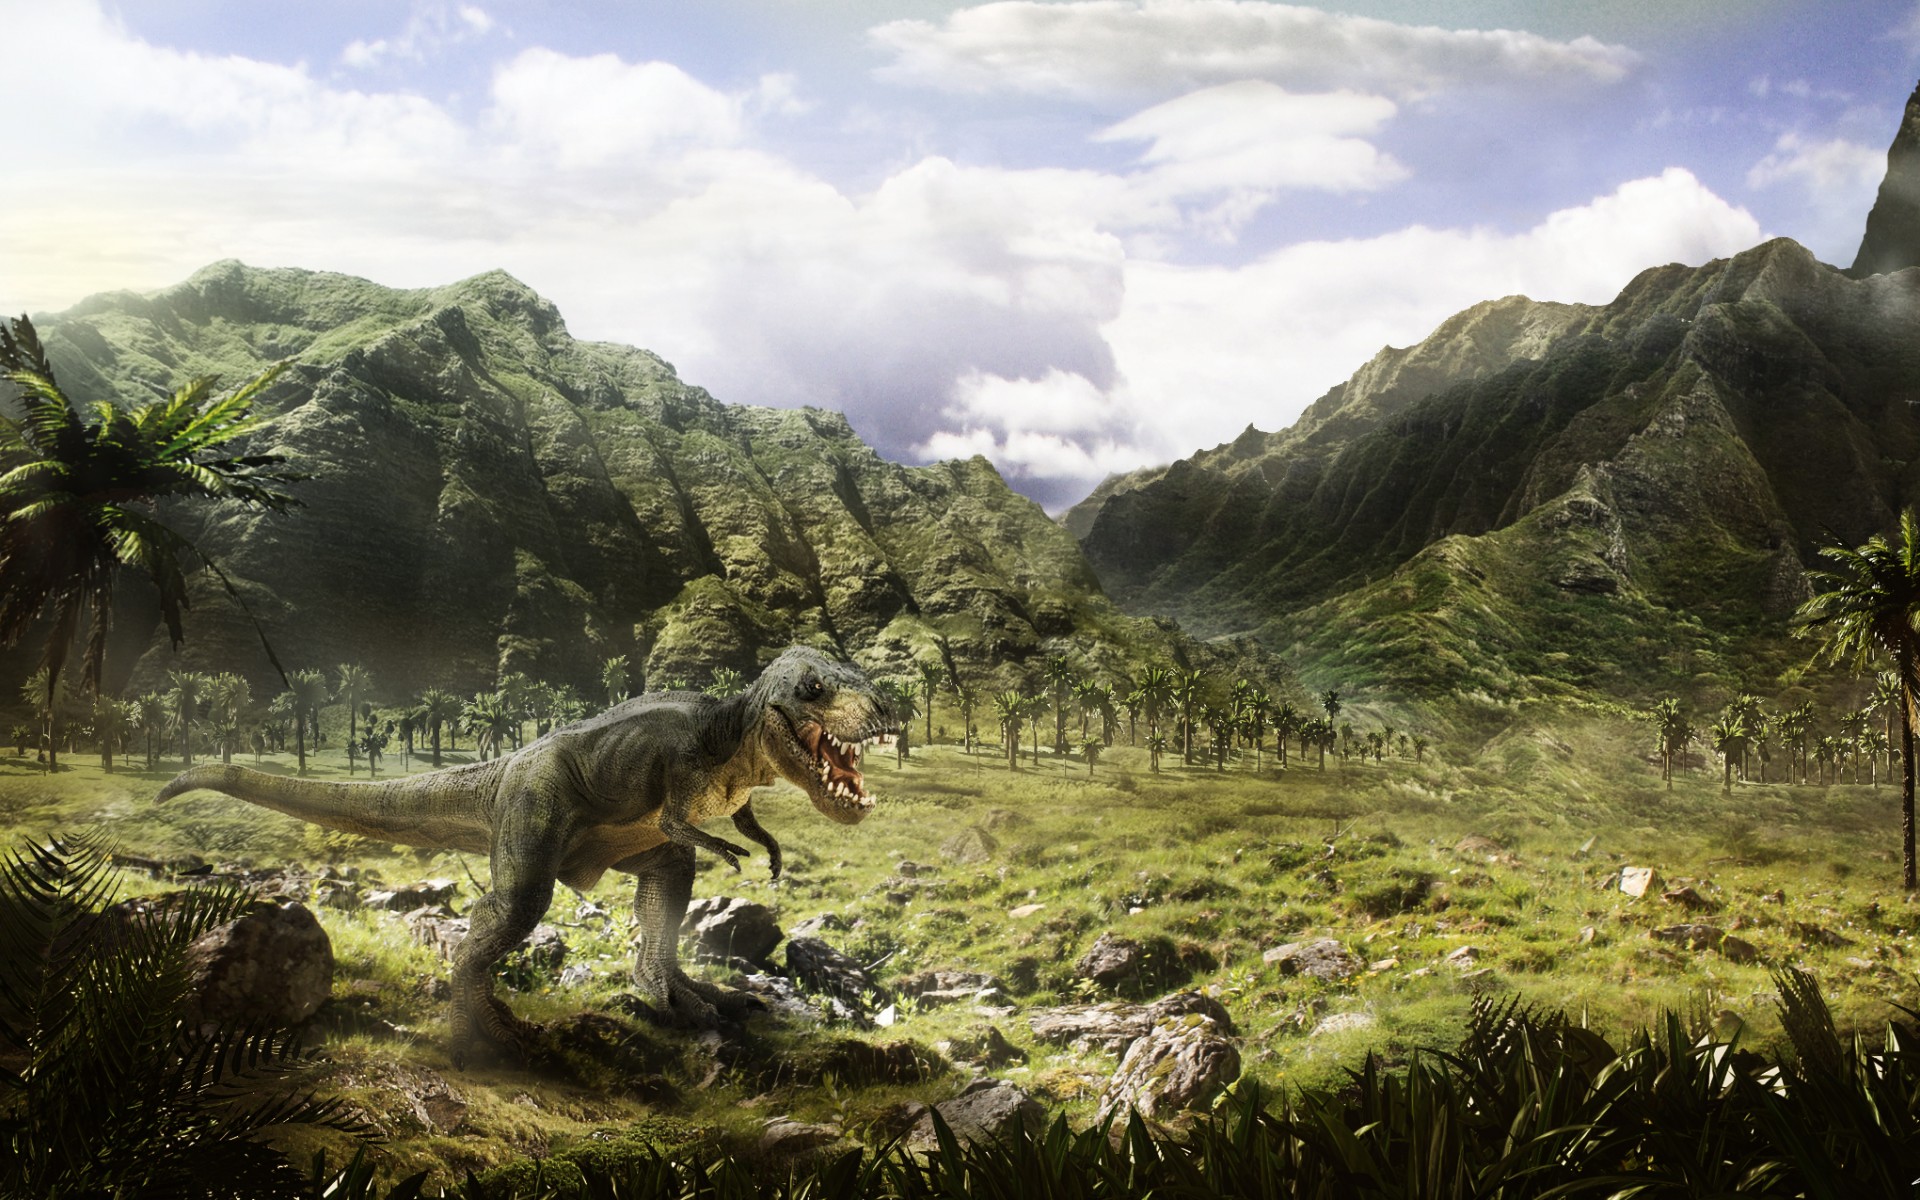 dinosaur wallpapers, photos and desktop backgrounds up to 8K [7680x4320